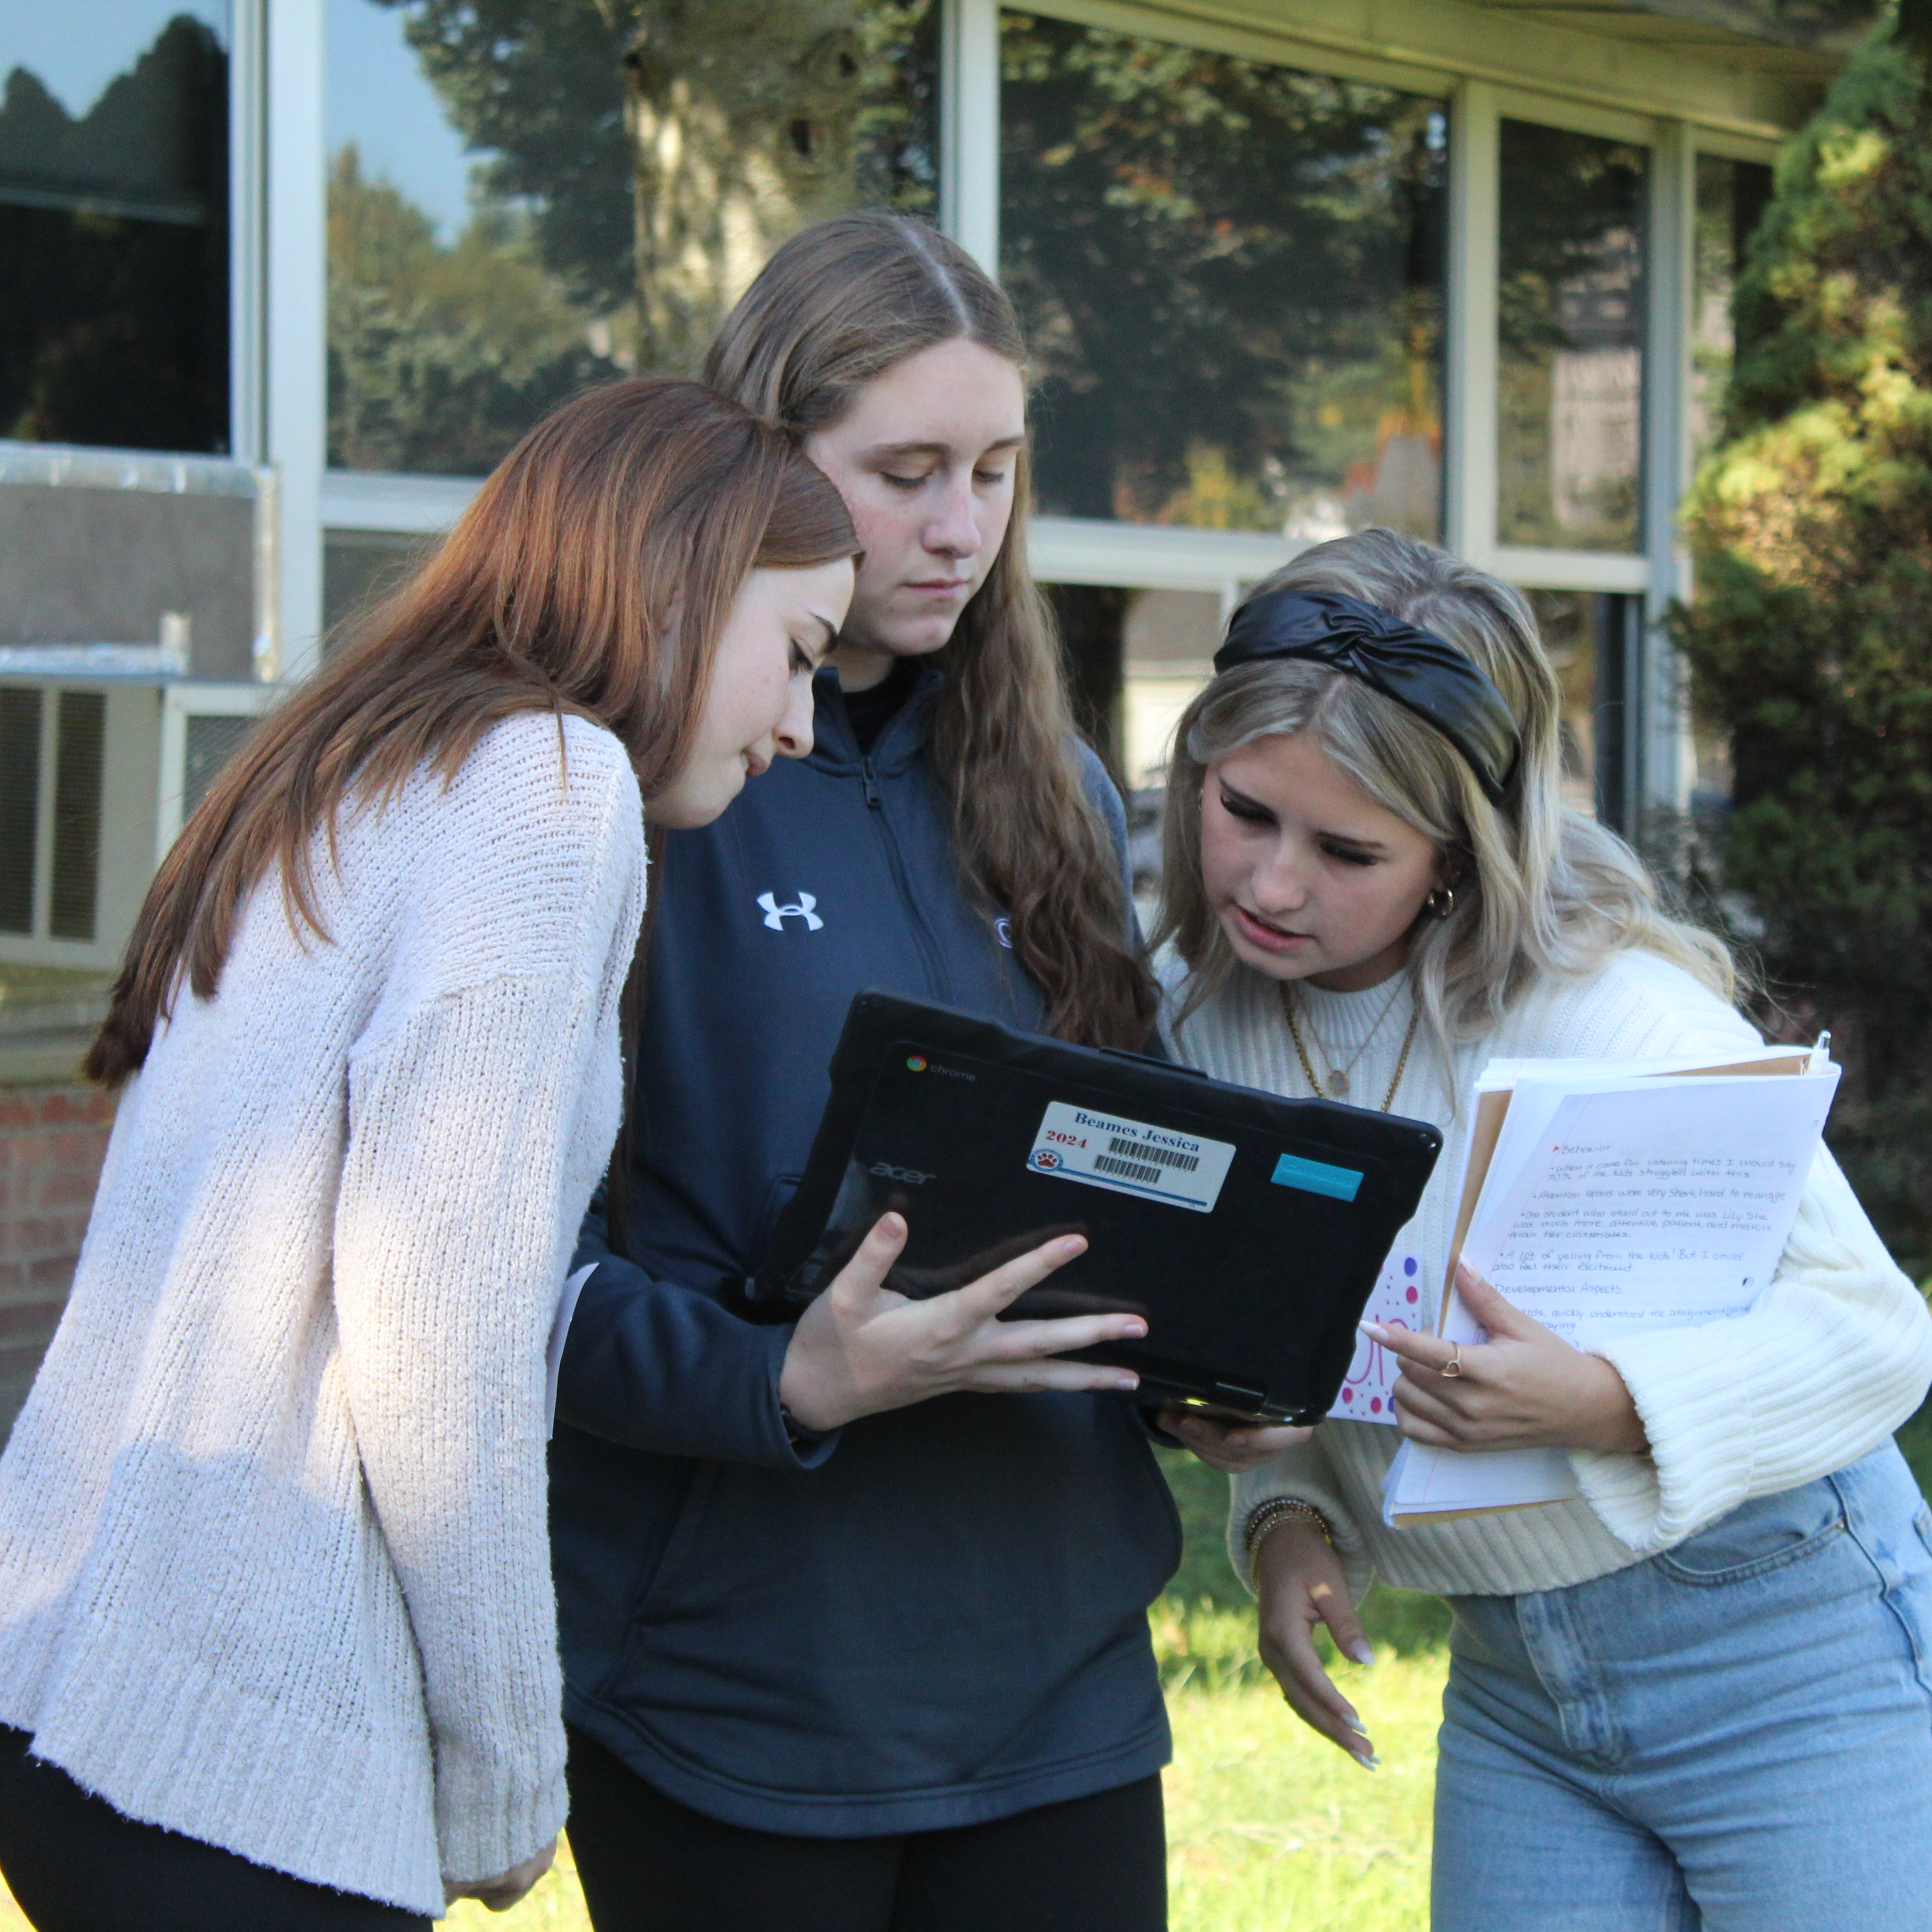 Three students look at a tablet